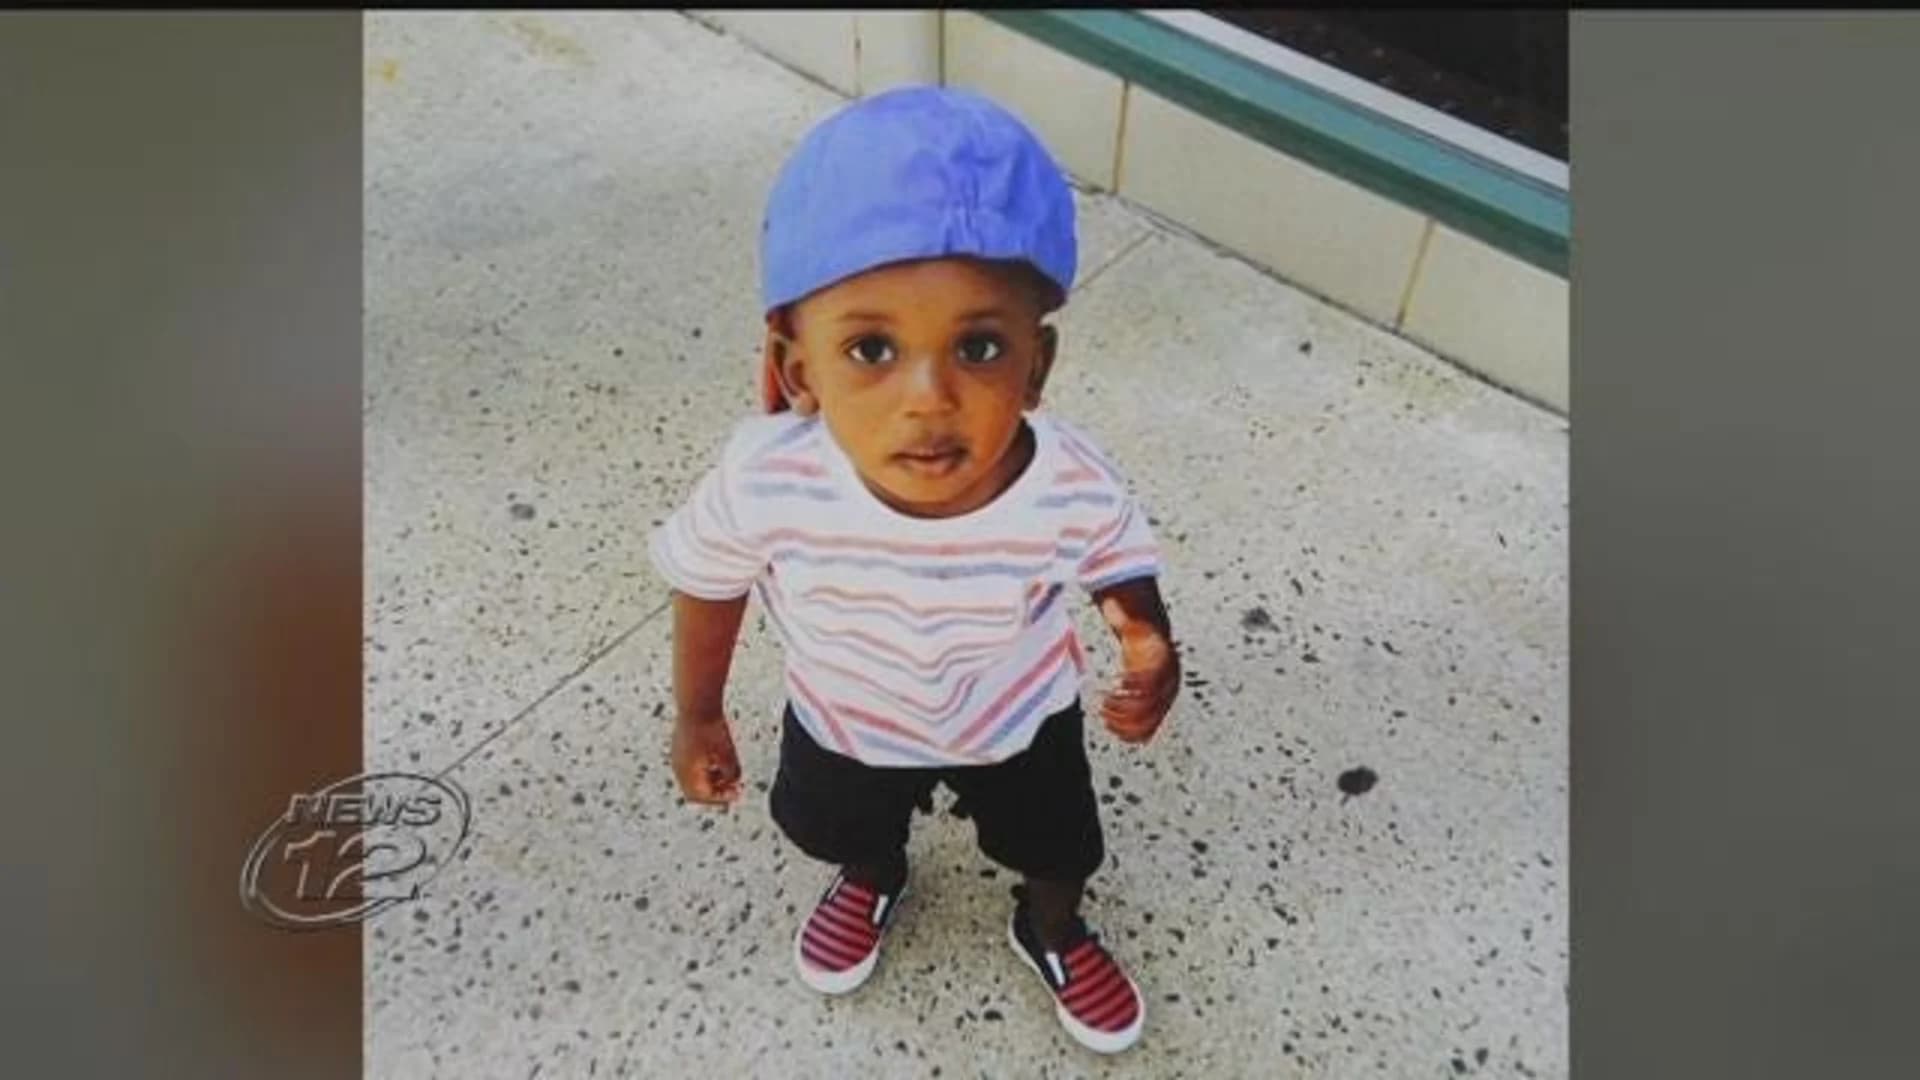 Trial begins for man accused of fatally beating toddler